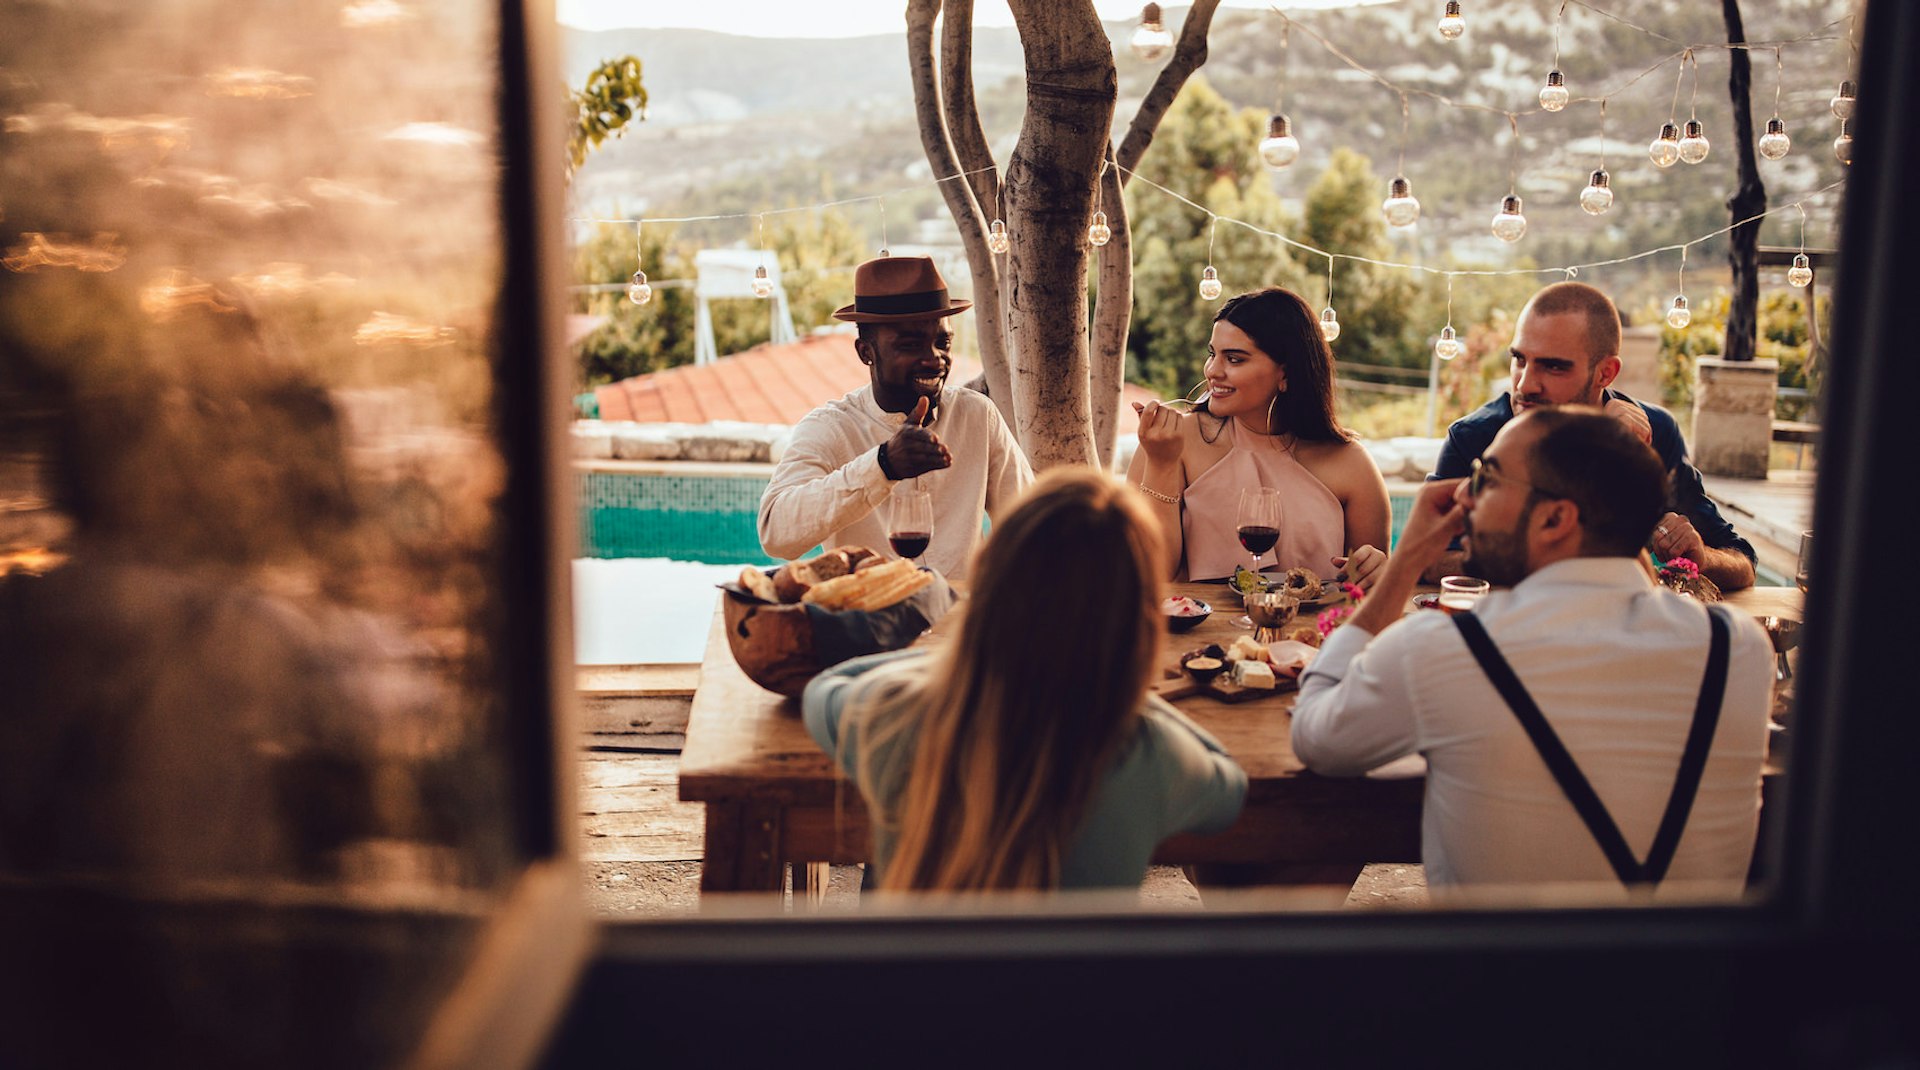 A group of five ethnically diverse people sit at a table in the sunshine eating and chatting.